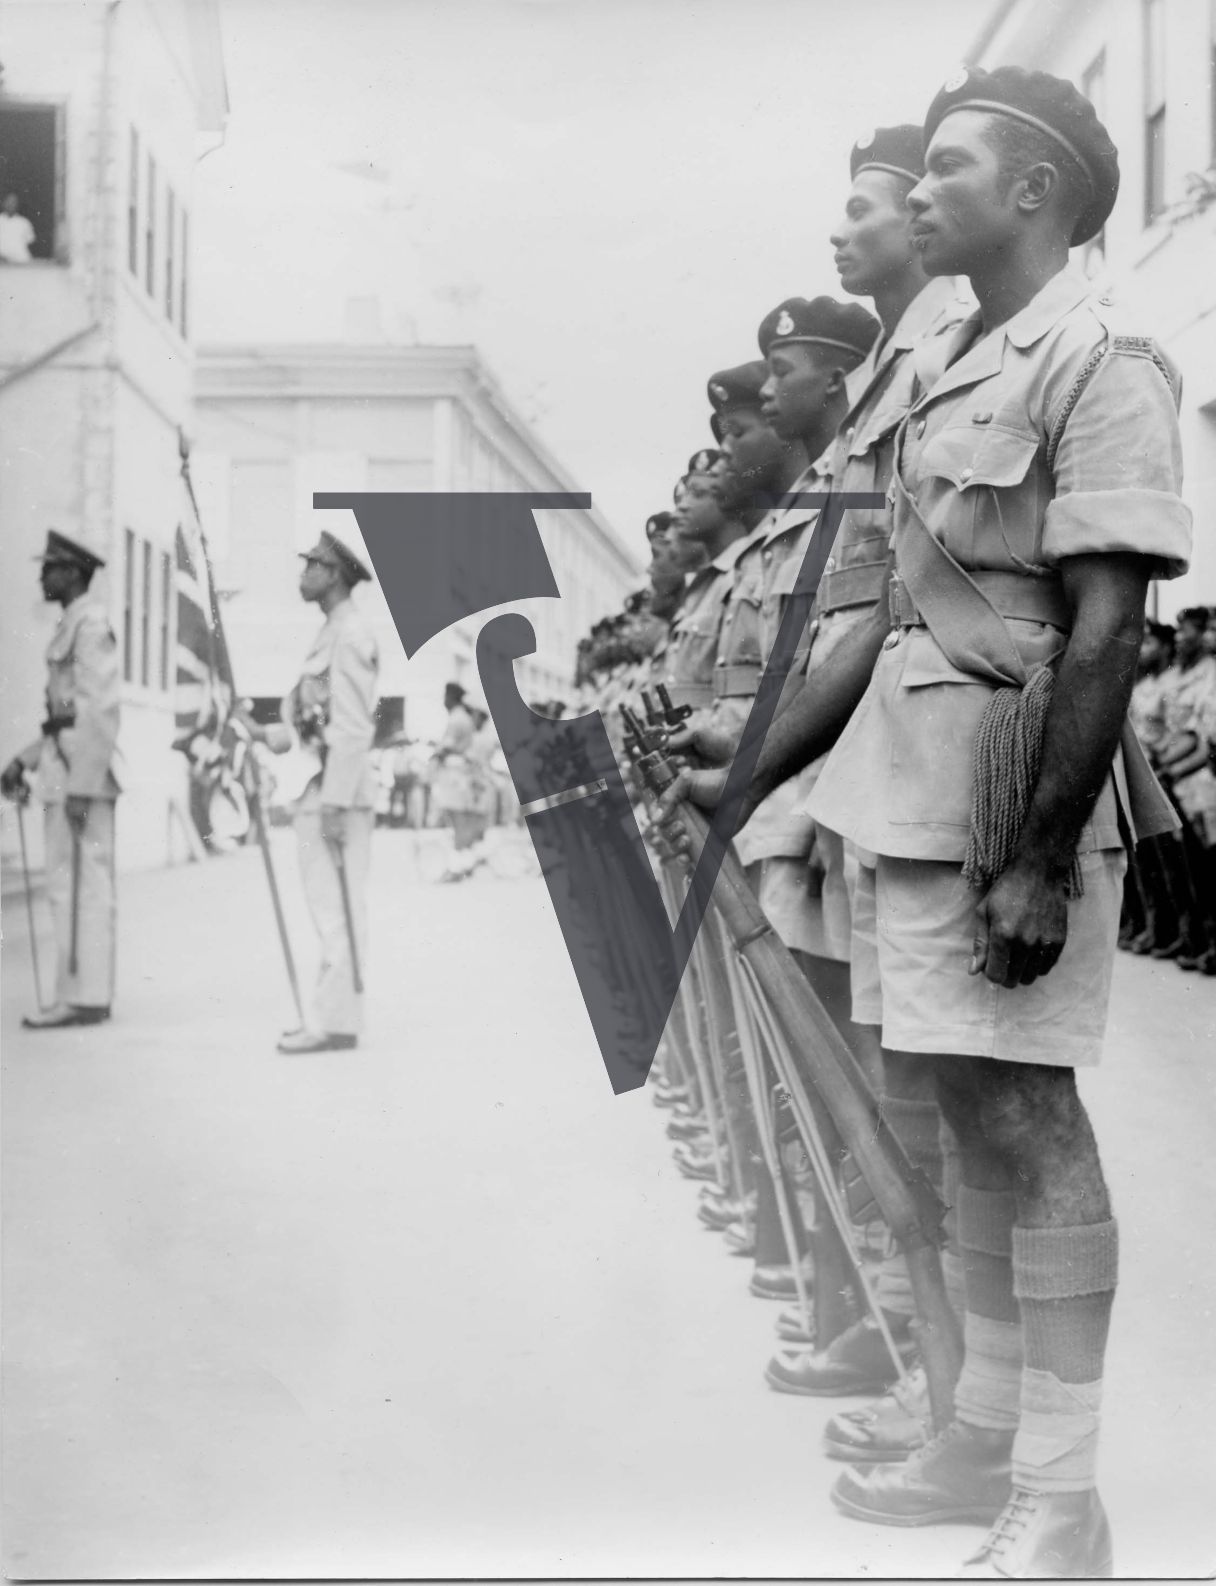 Belize, parade, soldiers in uniform, guns, military.